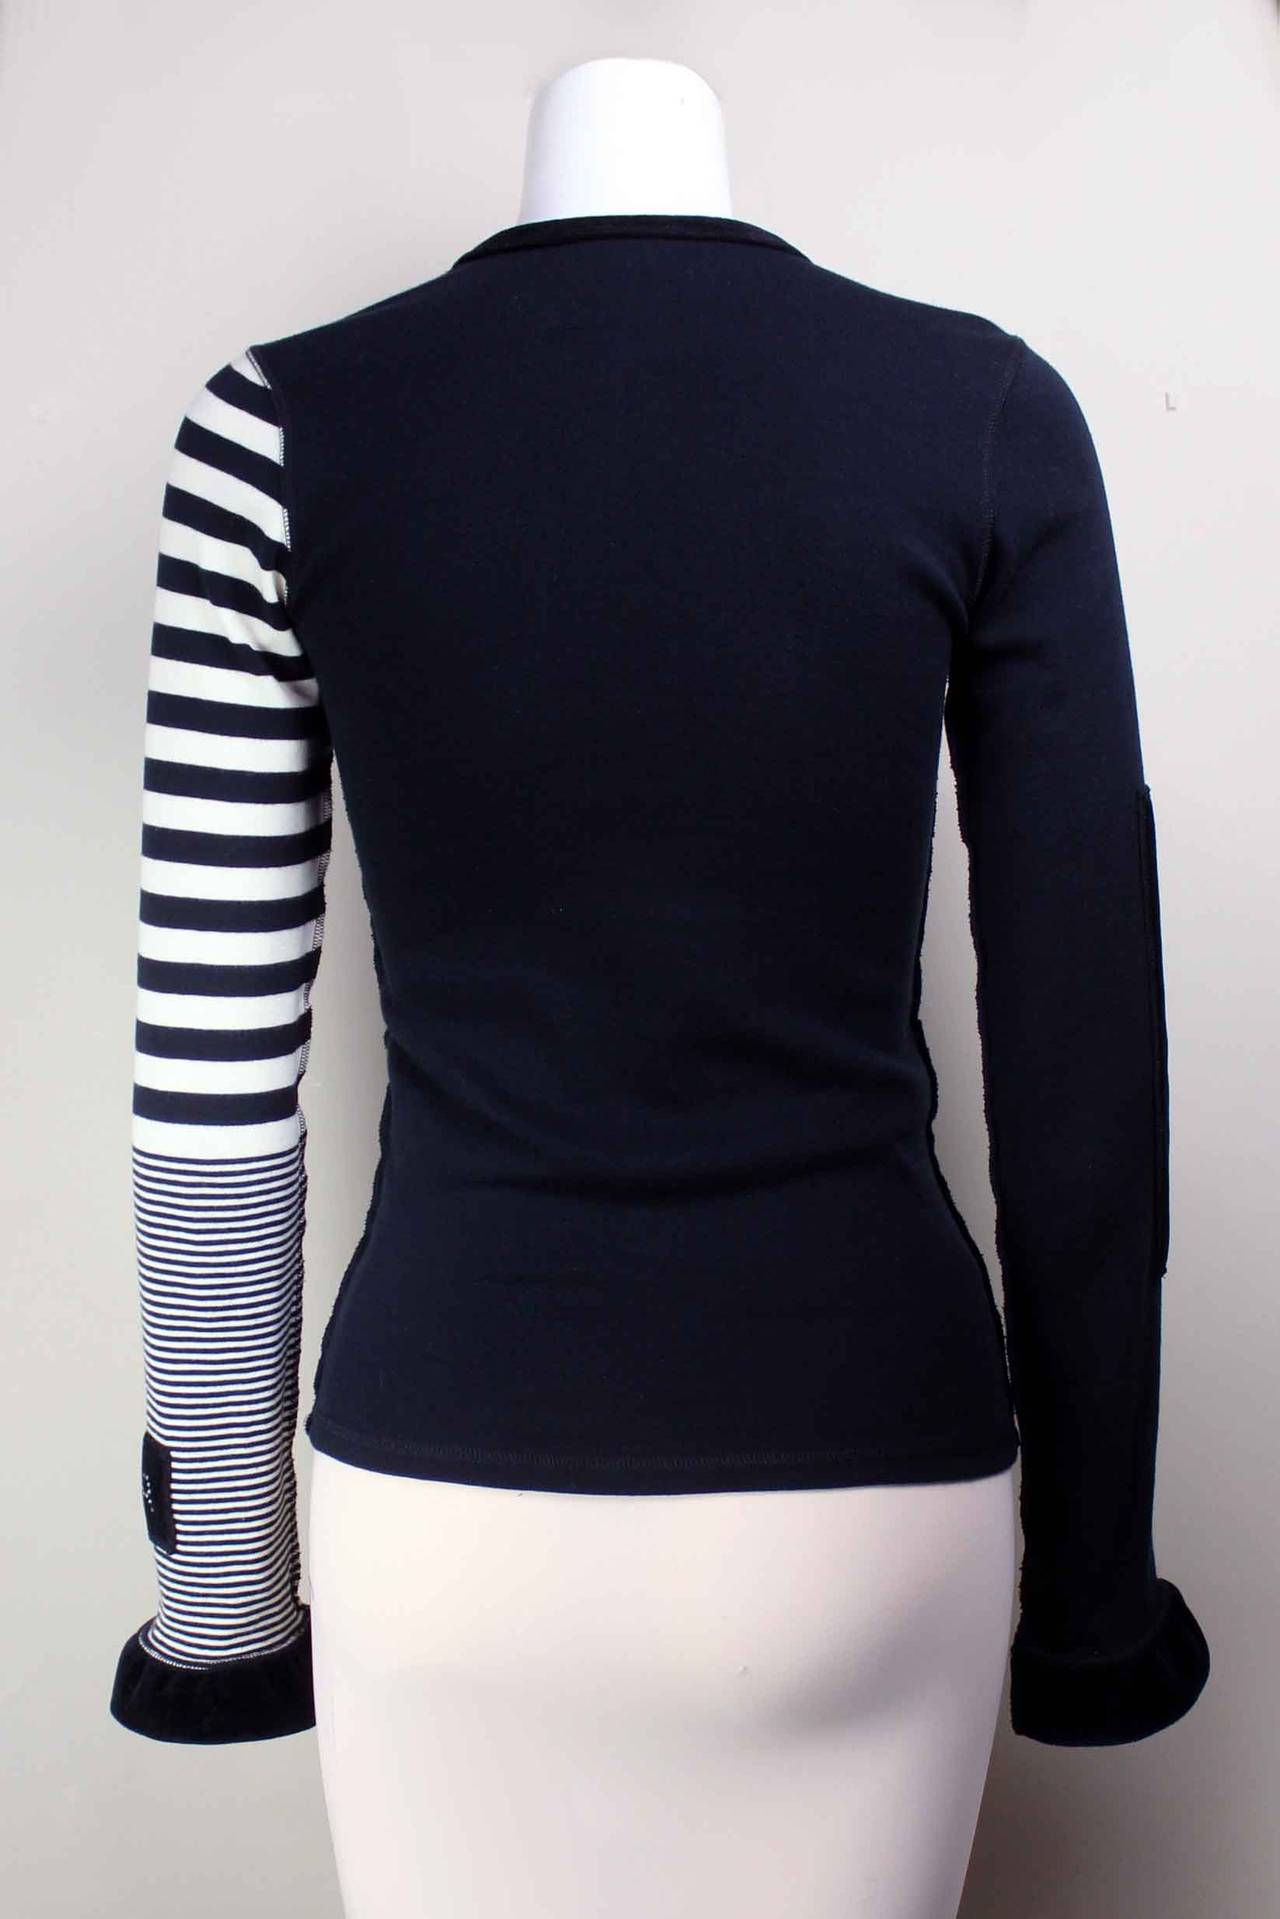 Sonia Rykiel Novelty Patchwork Knit Top In Excellent Condition In New York, NY